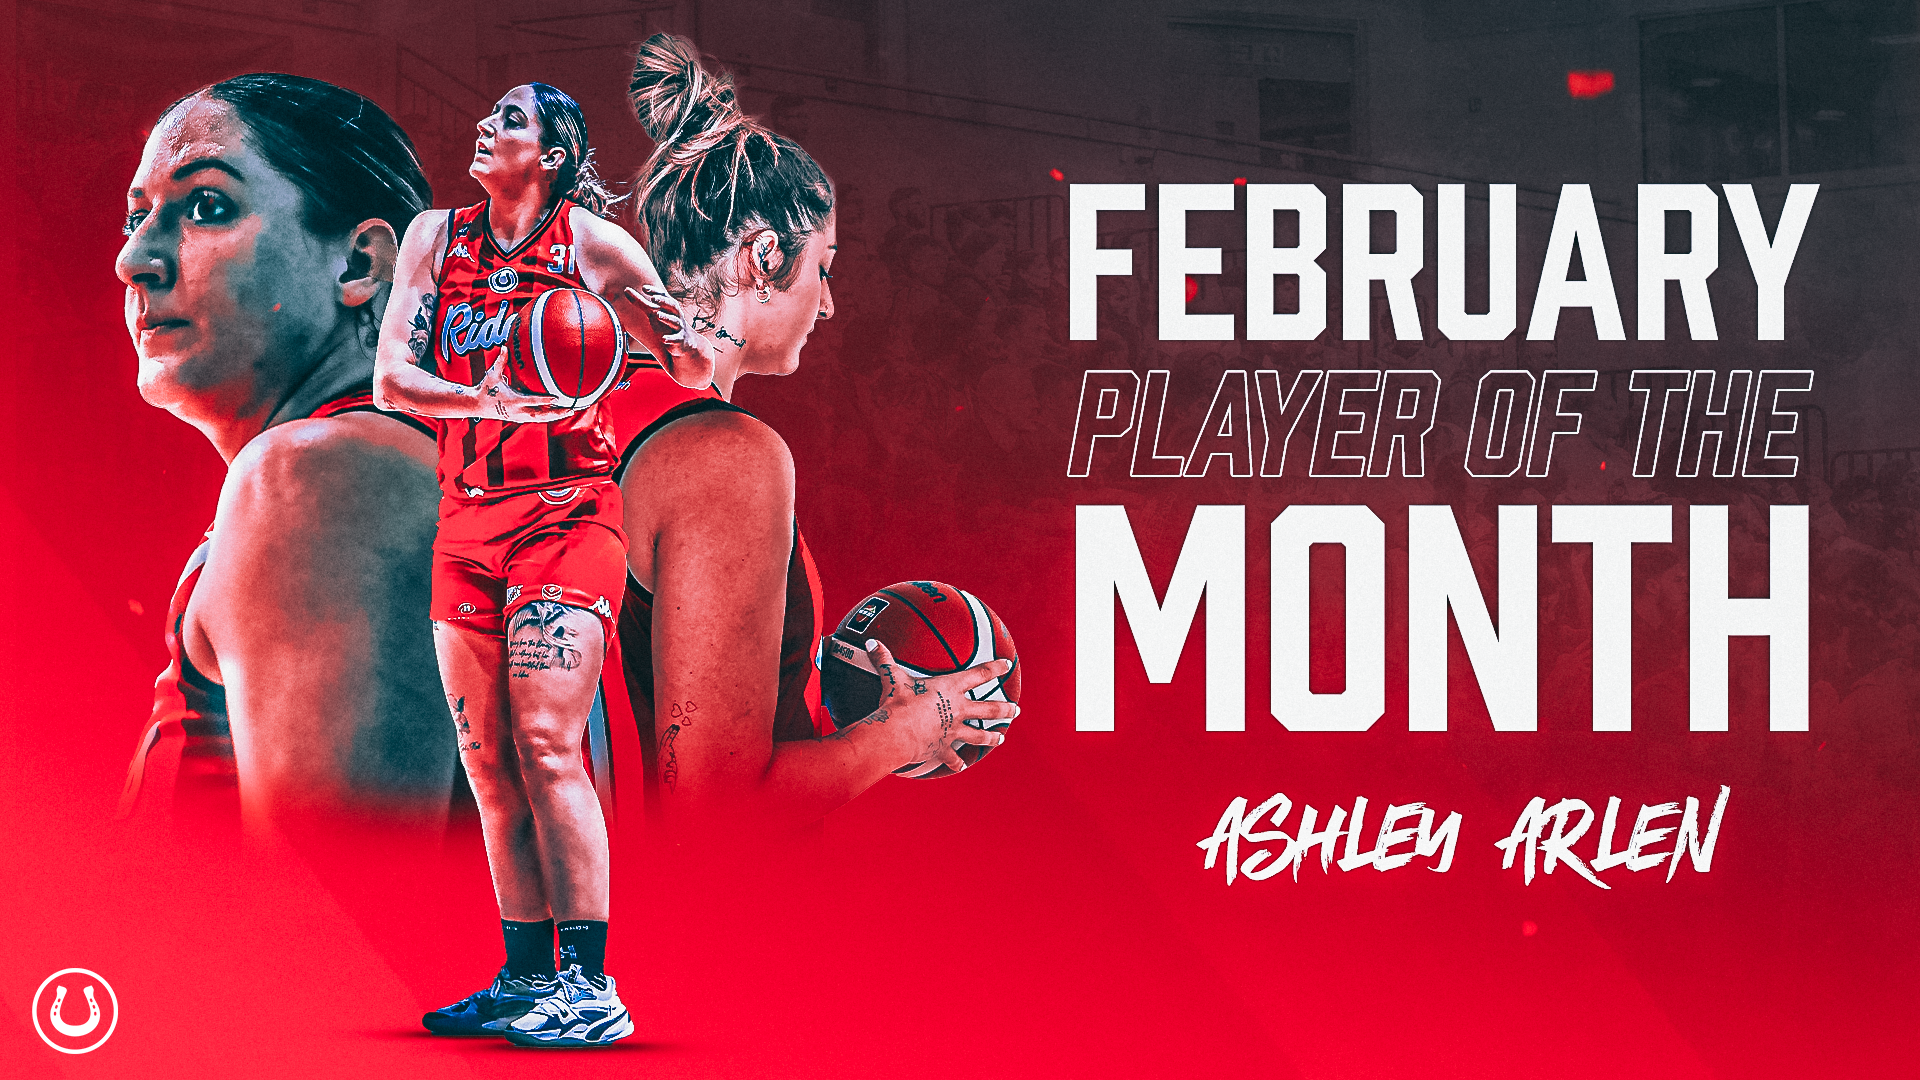 Arlen wins Player of the Month